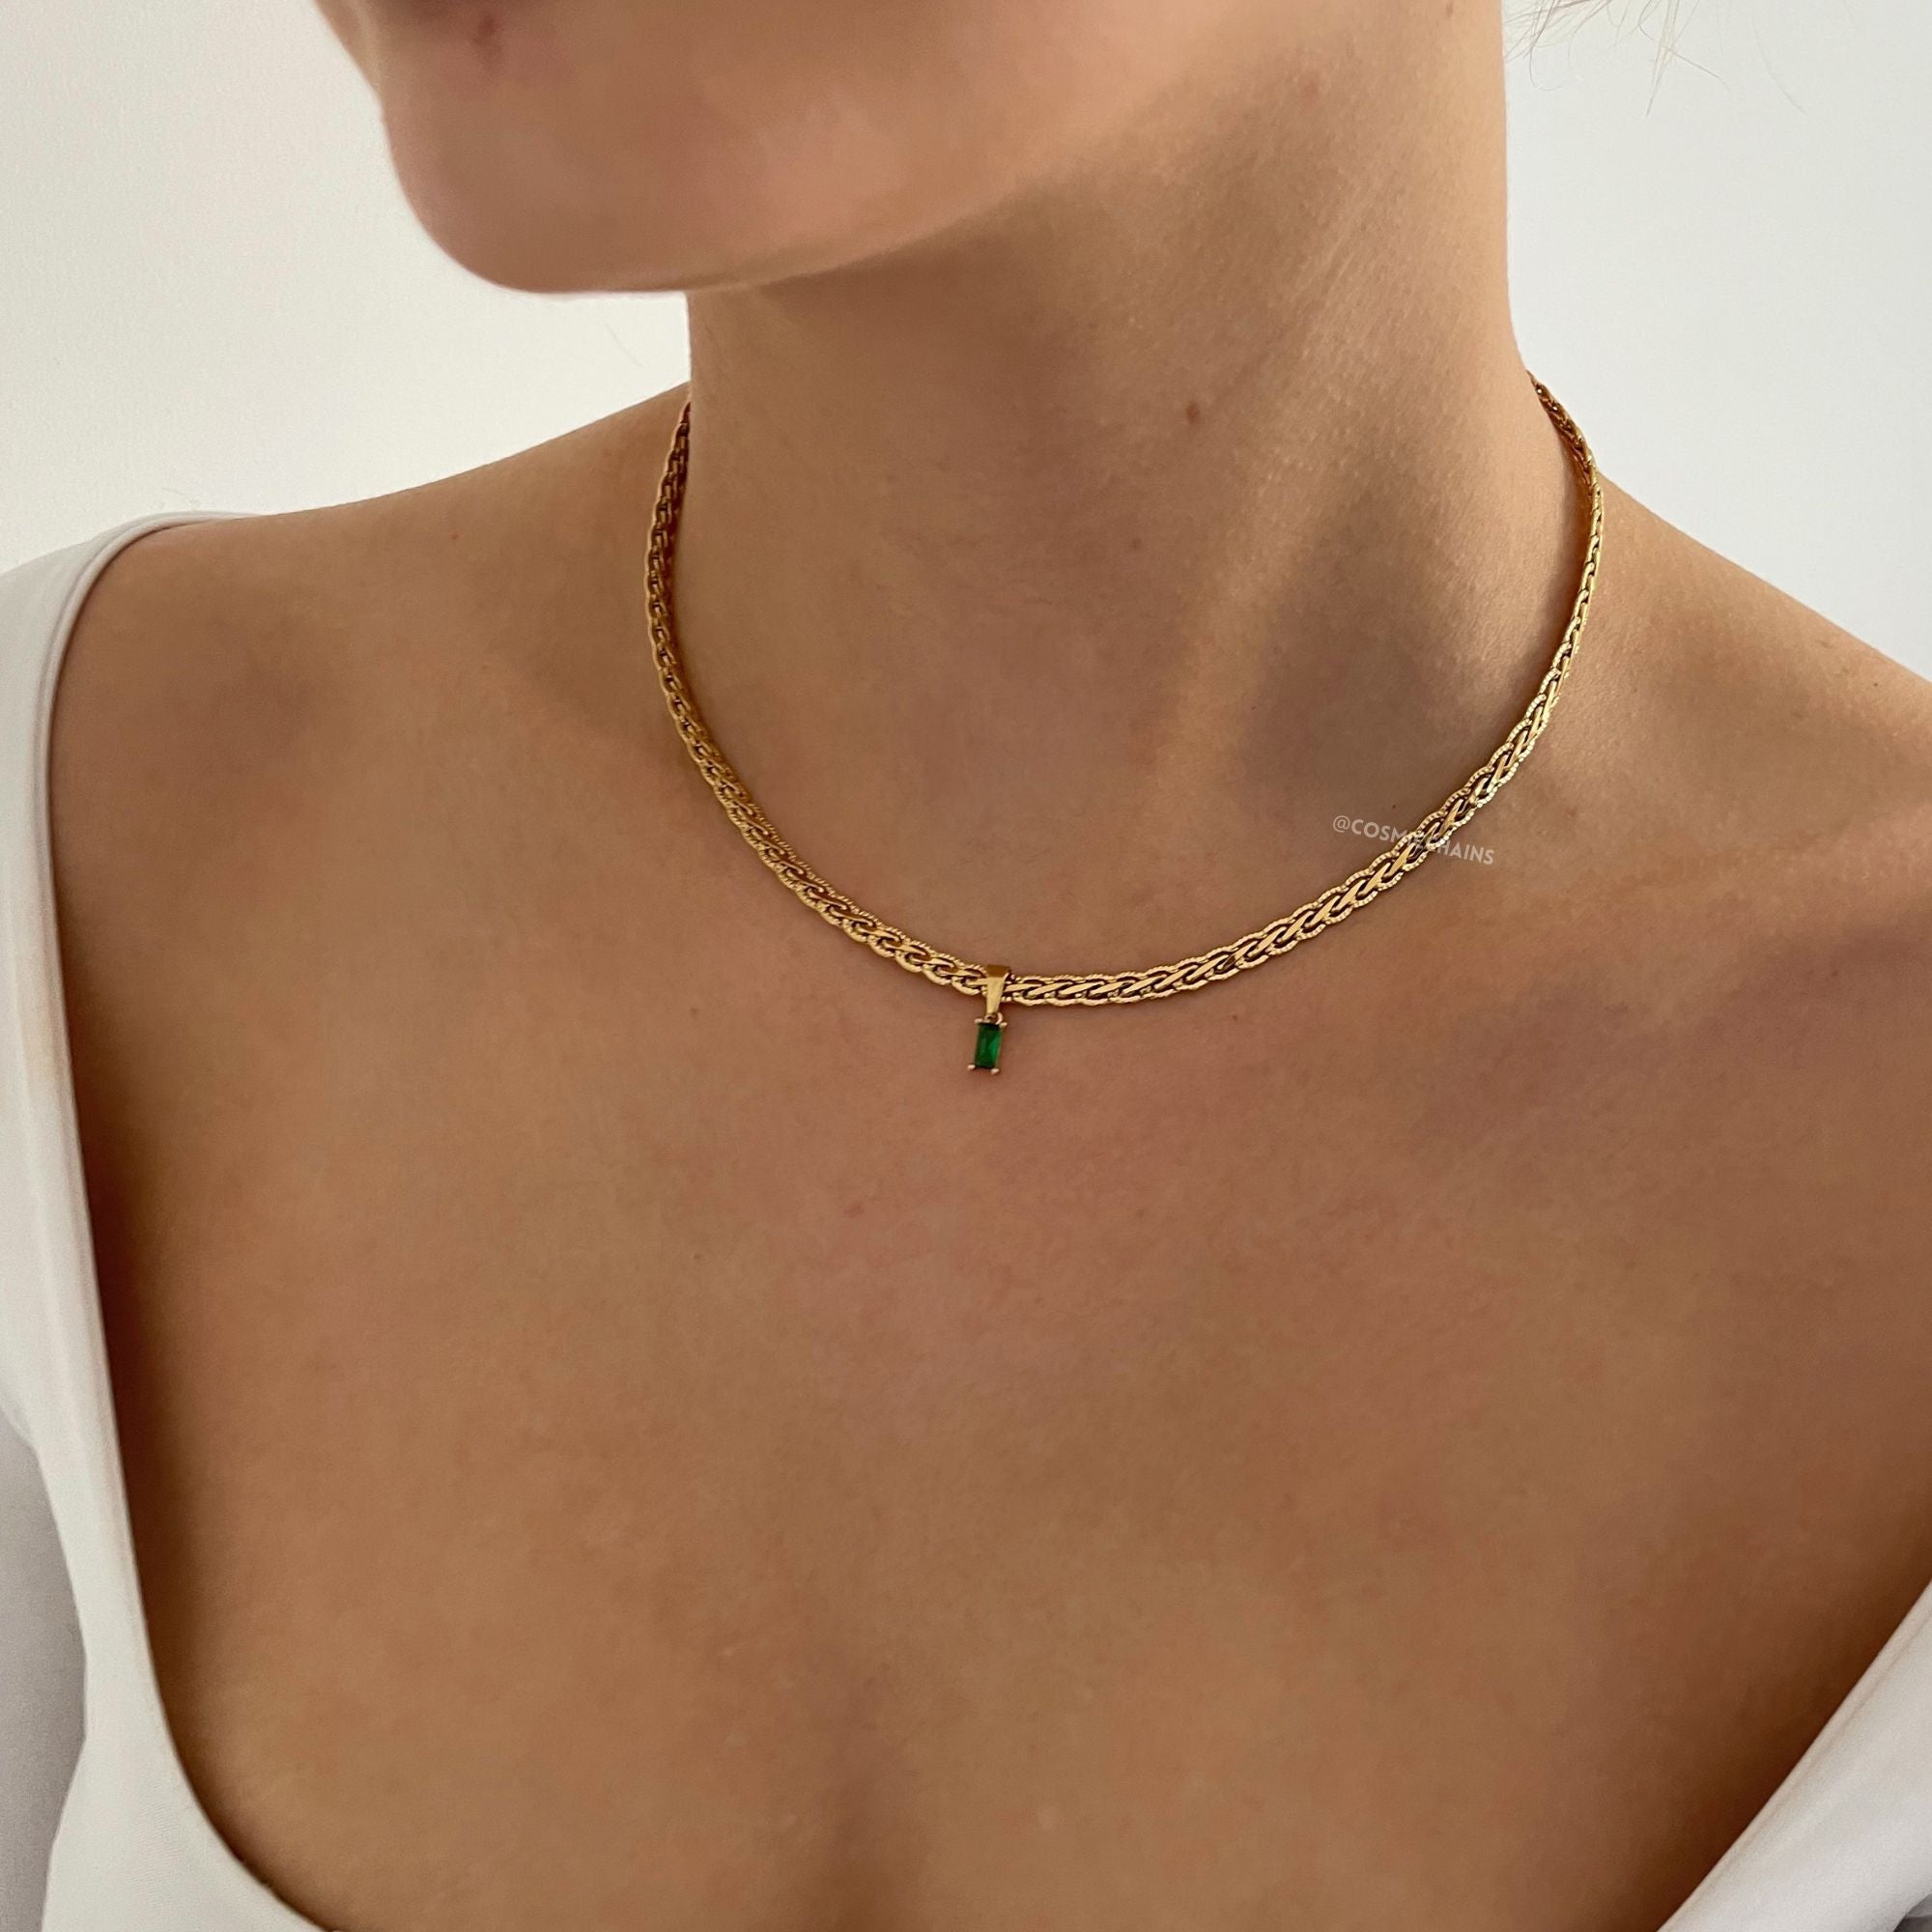 Classy jewelry piece: gold necklace adorned with green charm 